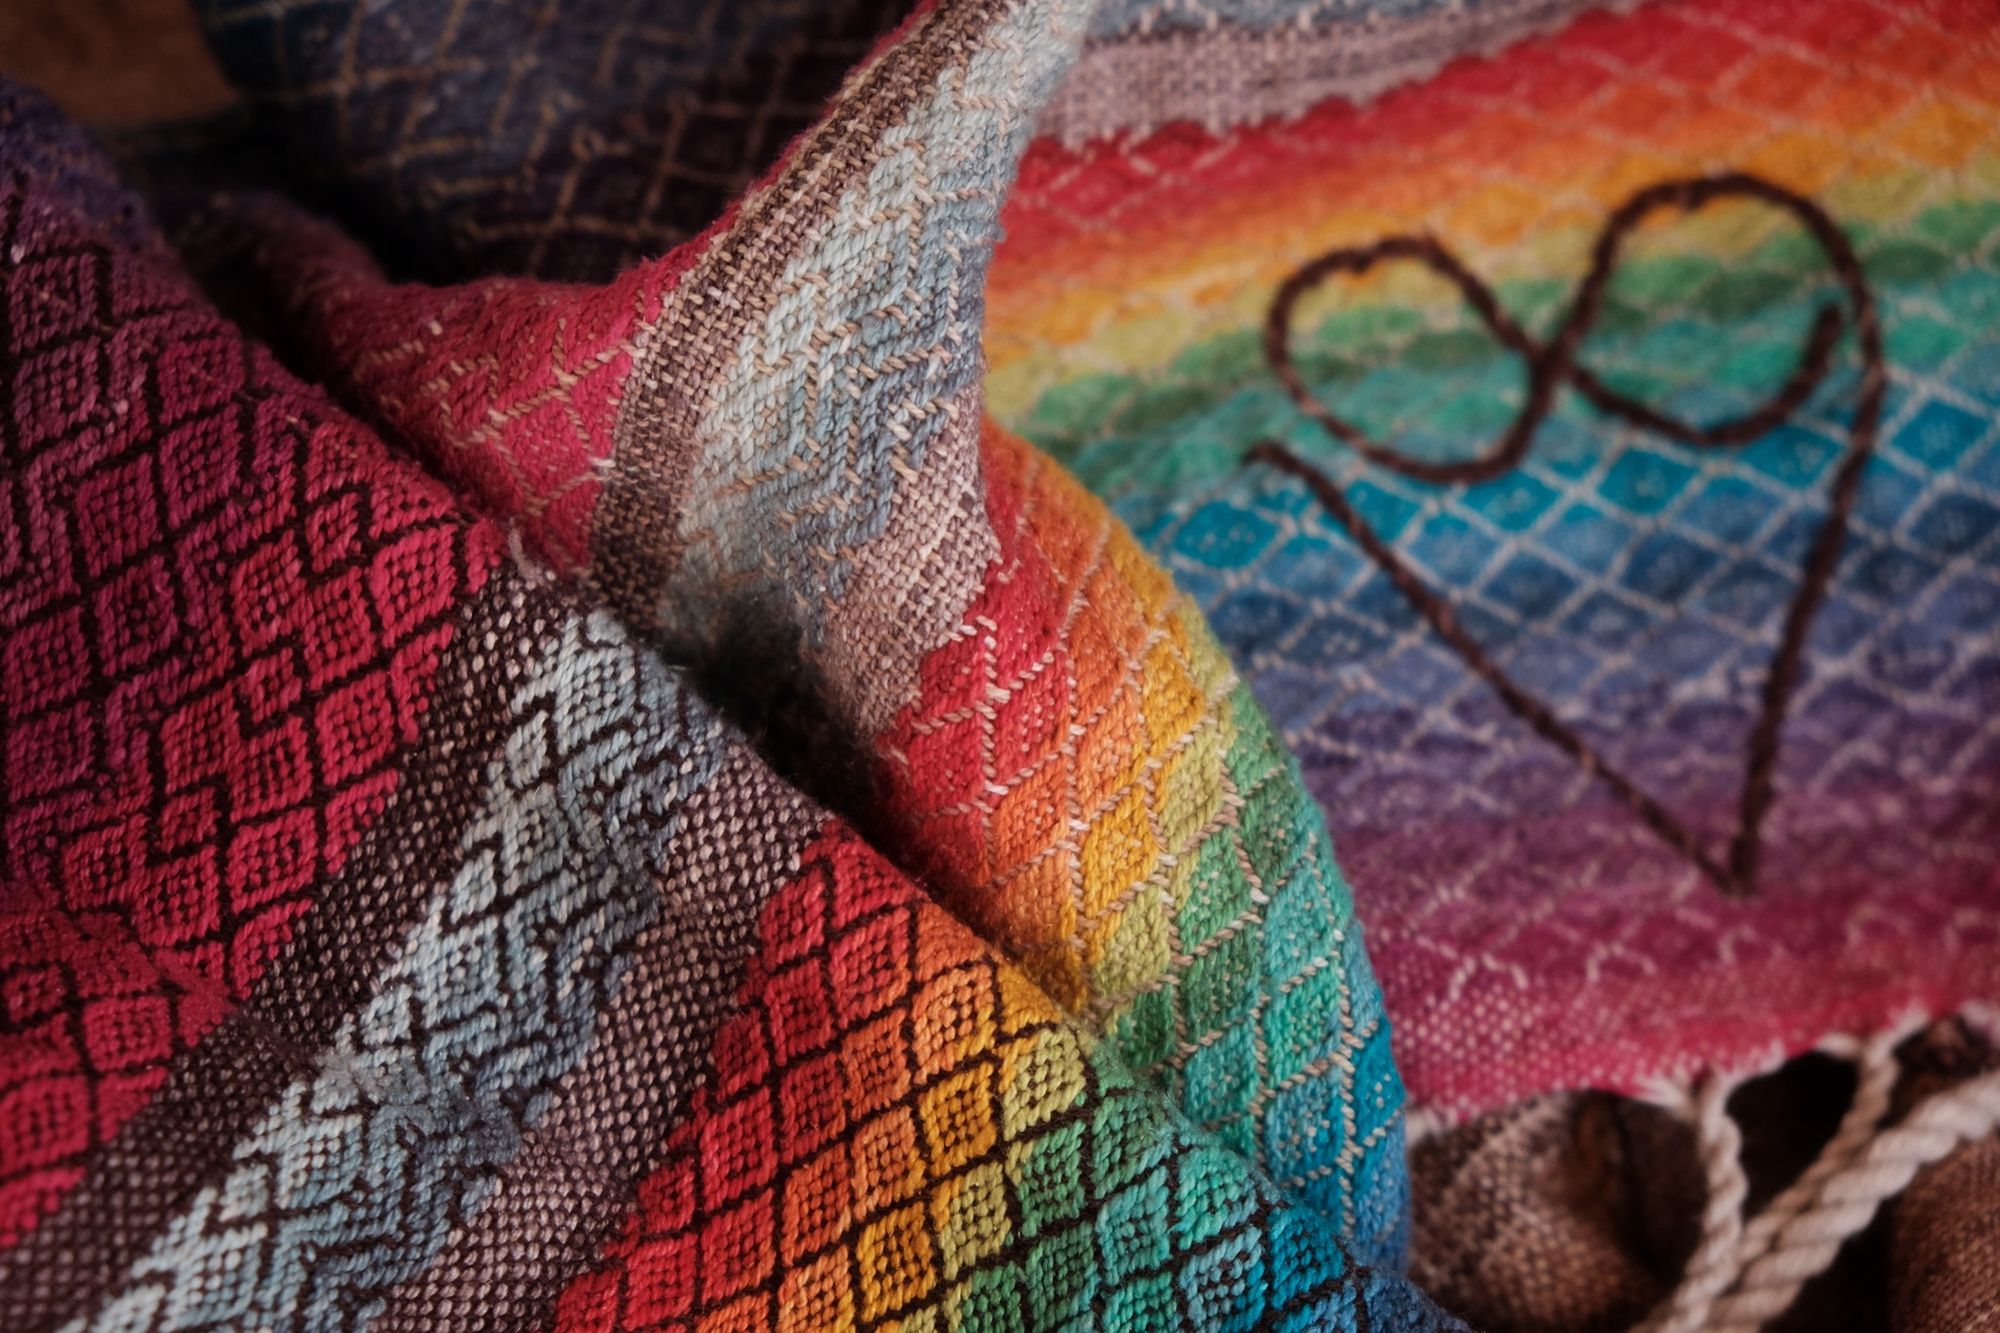 Handwoven fabric with a diamond pattern in brown, cream, white and rainbow colors with a heart detail